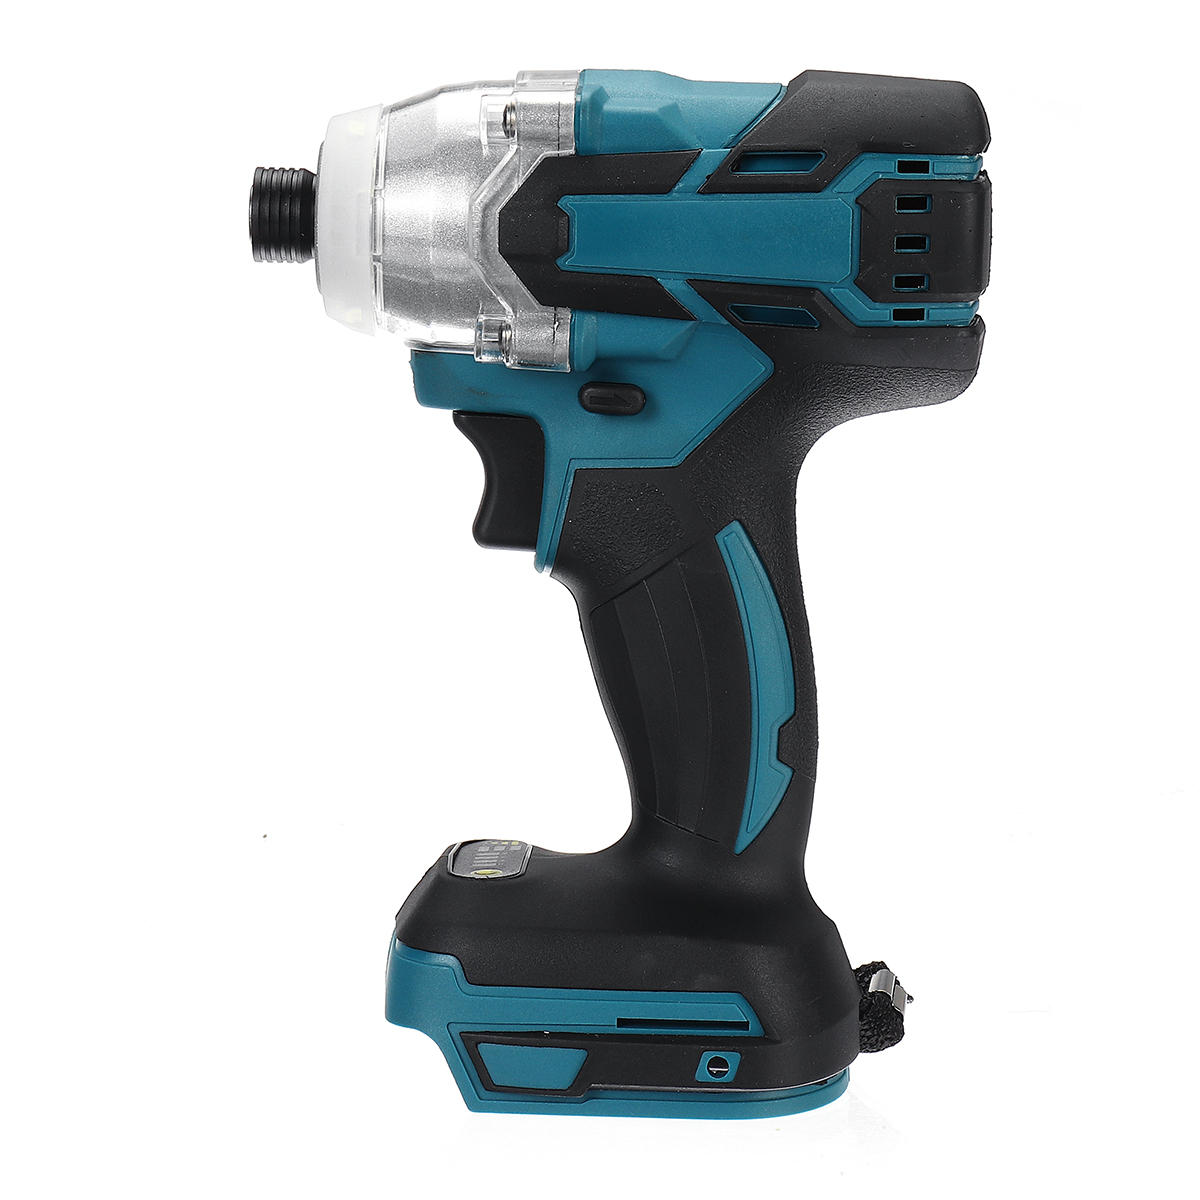 Drillpro 18V 520Nm Cordless Brushless Impact Electric Screwdriver Stepless Speed Rechargable Driver Adapted To Makiita Battery COD